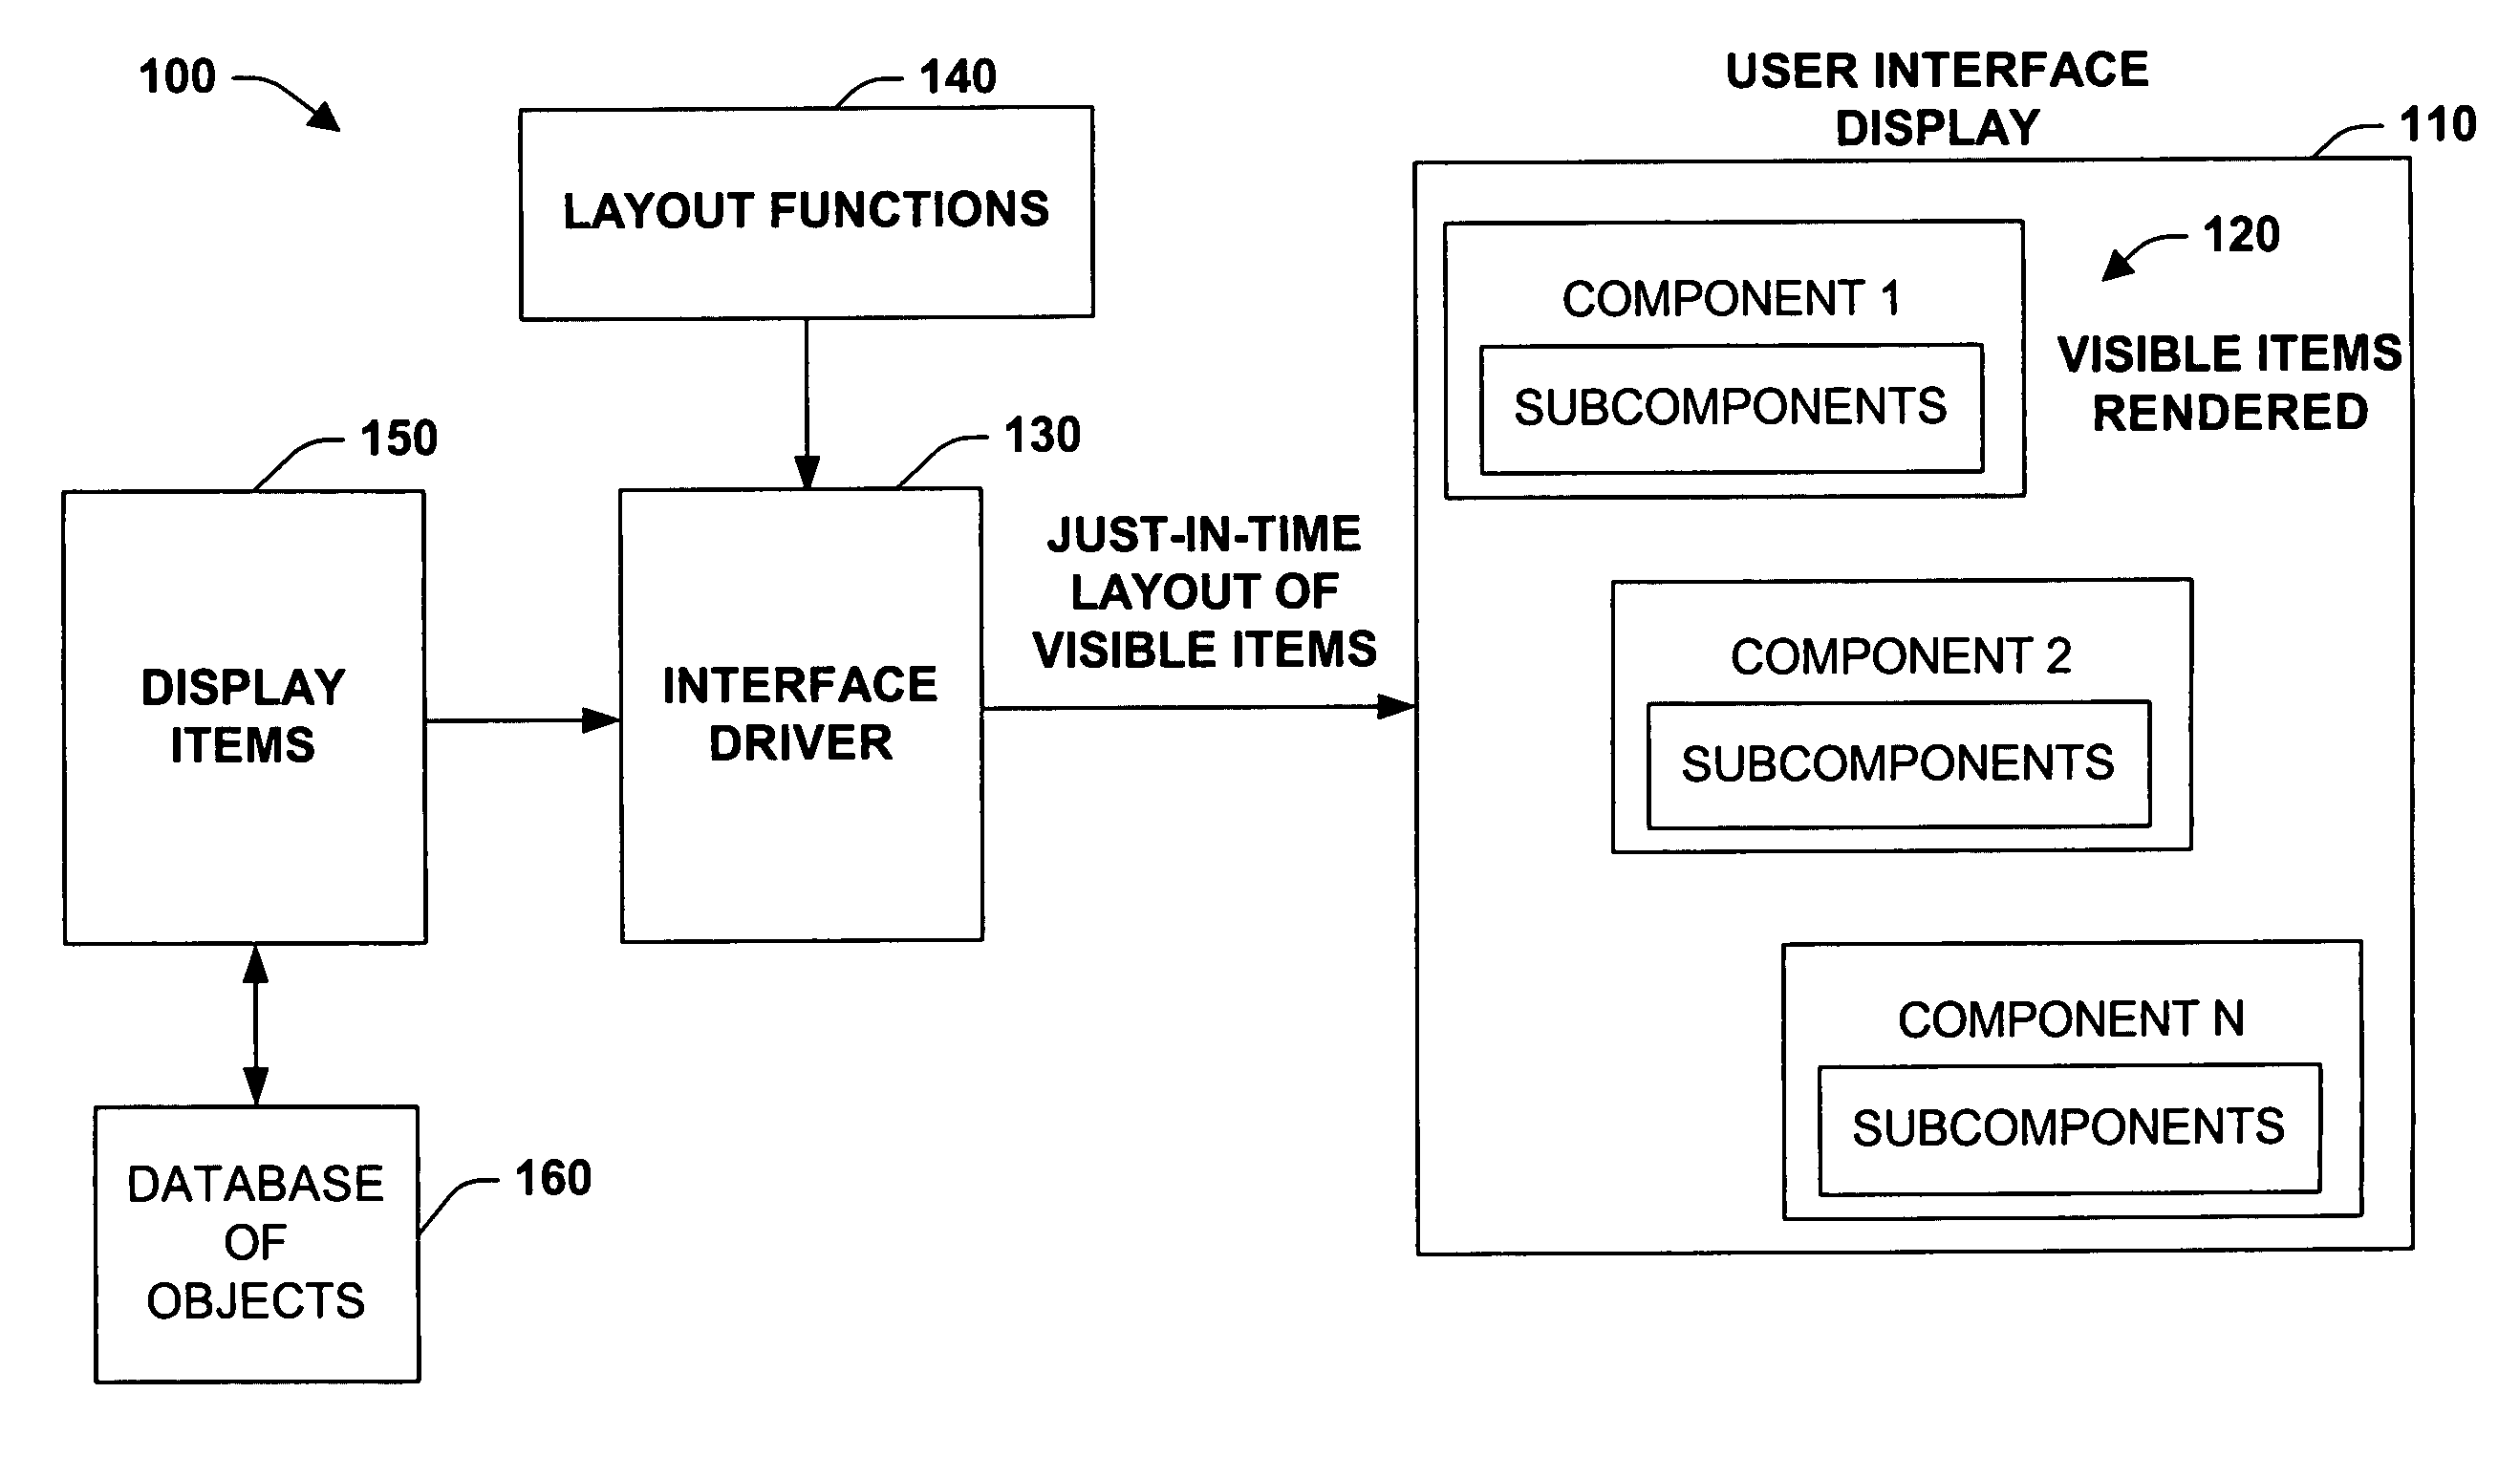 Just-in-time user interface layout